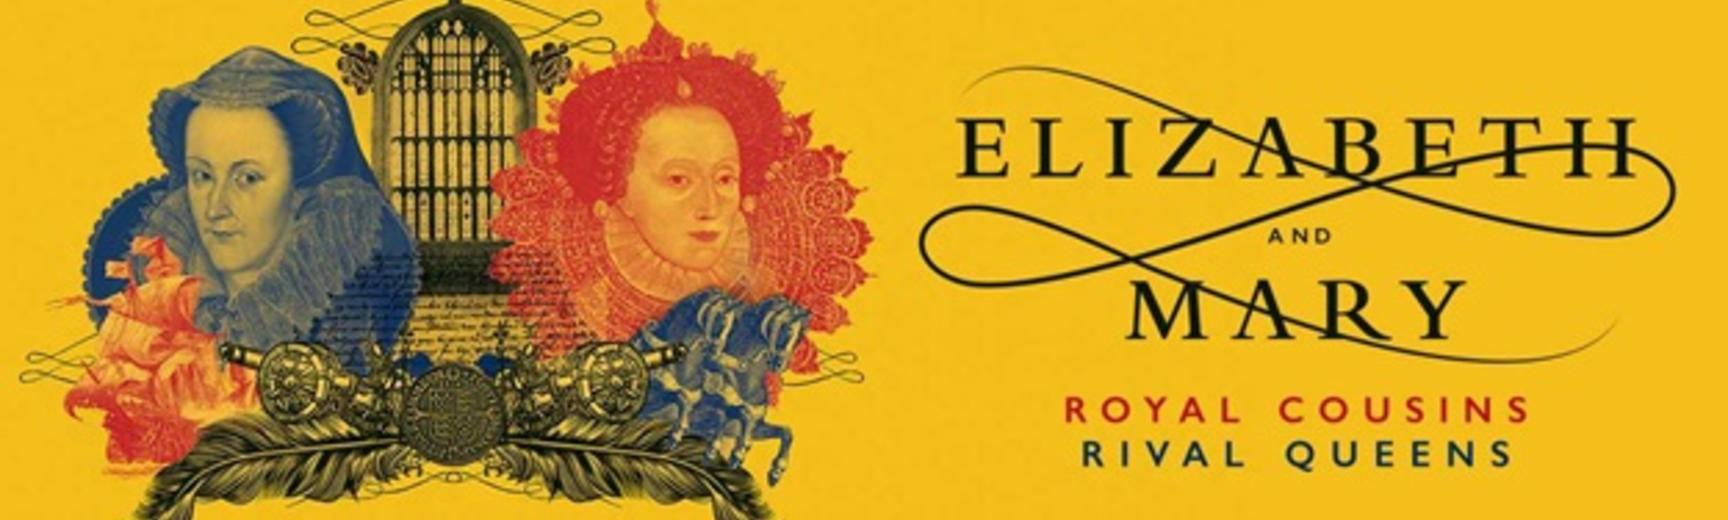 elizabeth and mary exhibition image august 2021